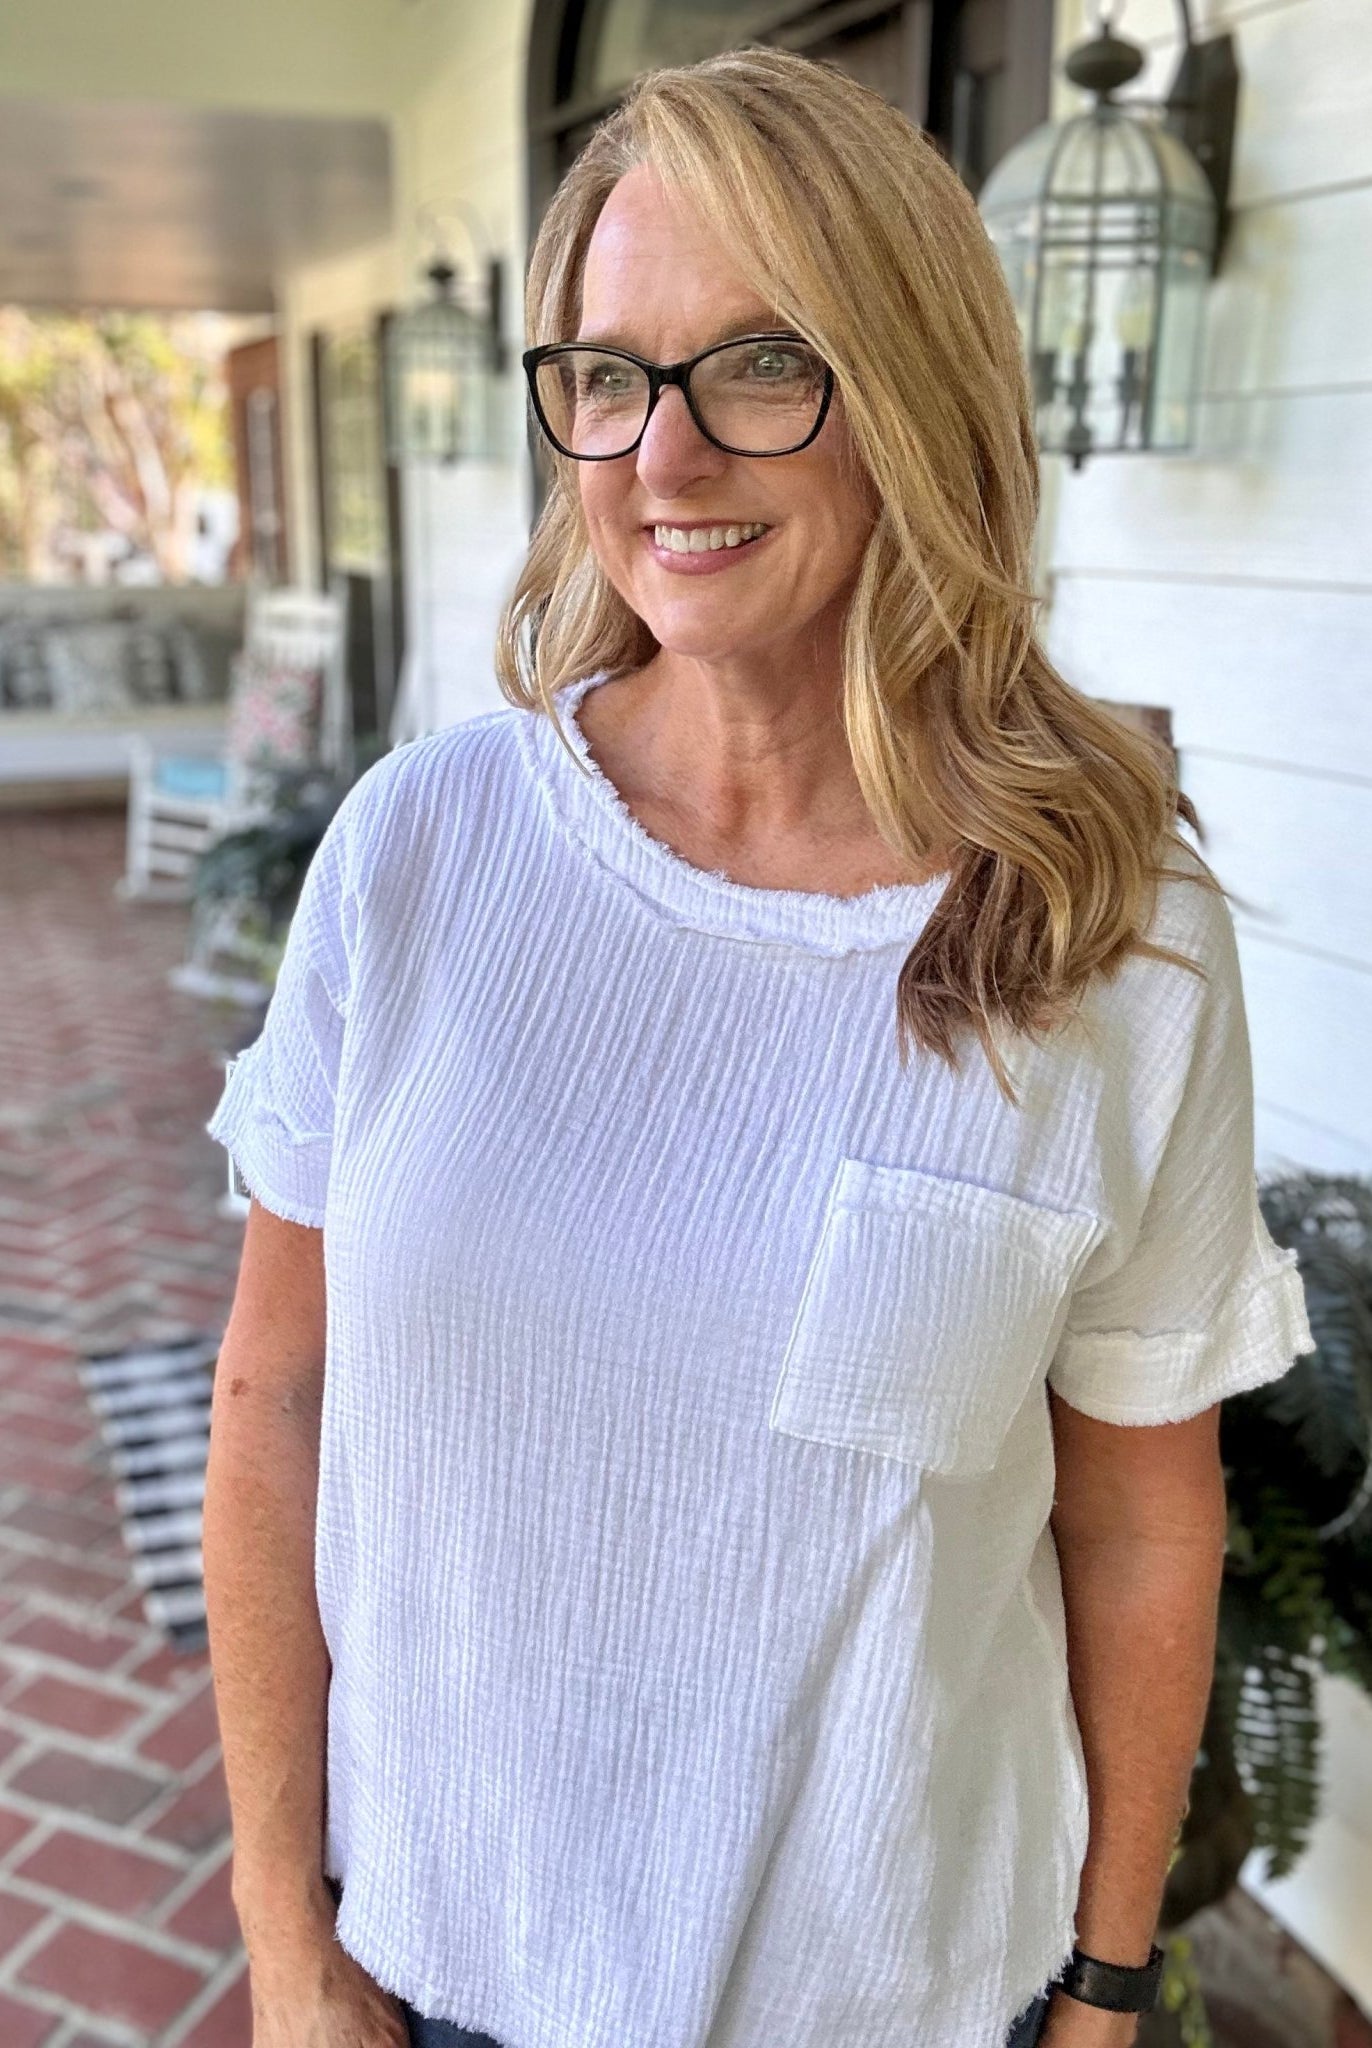 Zenana Gauze Boatneck Top - White - Casual Top -Jimberly's Boutique-Olive Branch-Mississippi